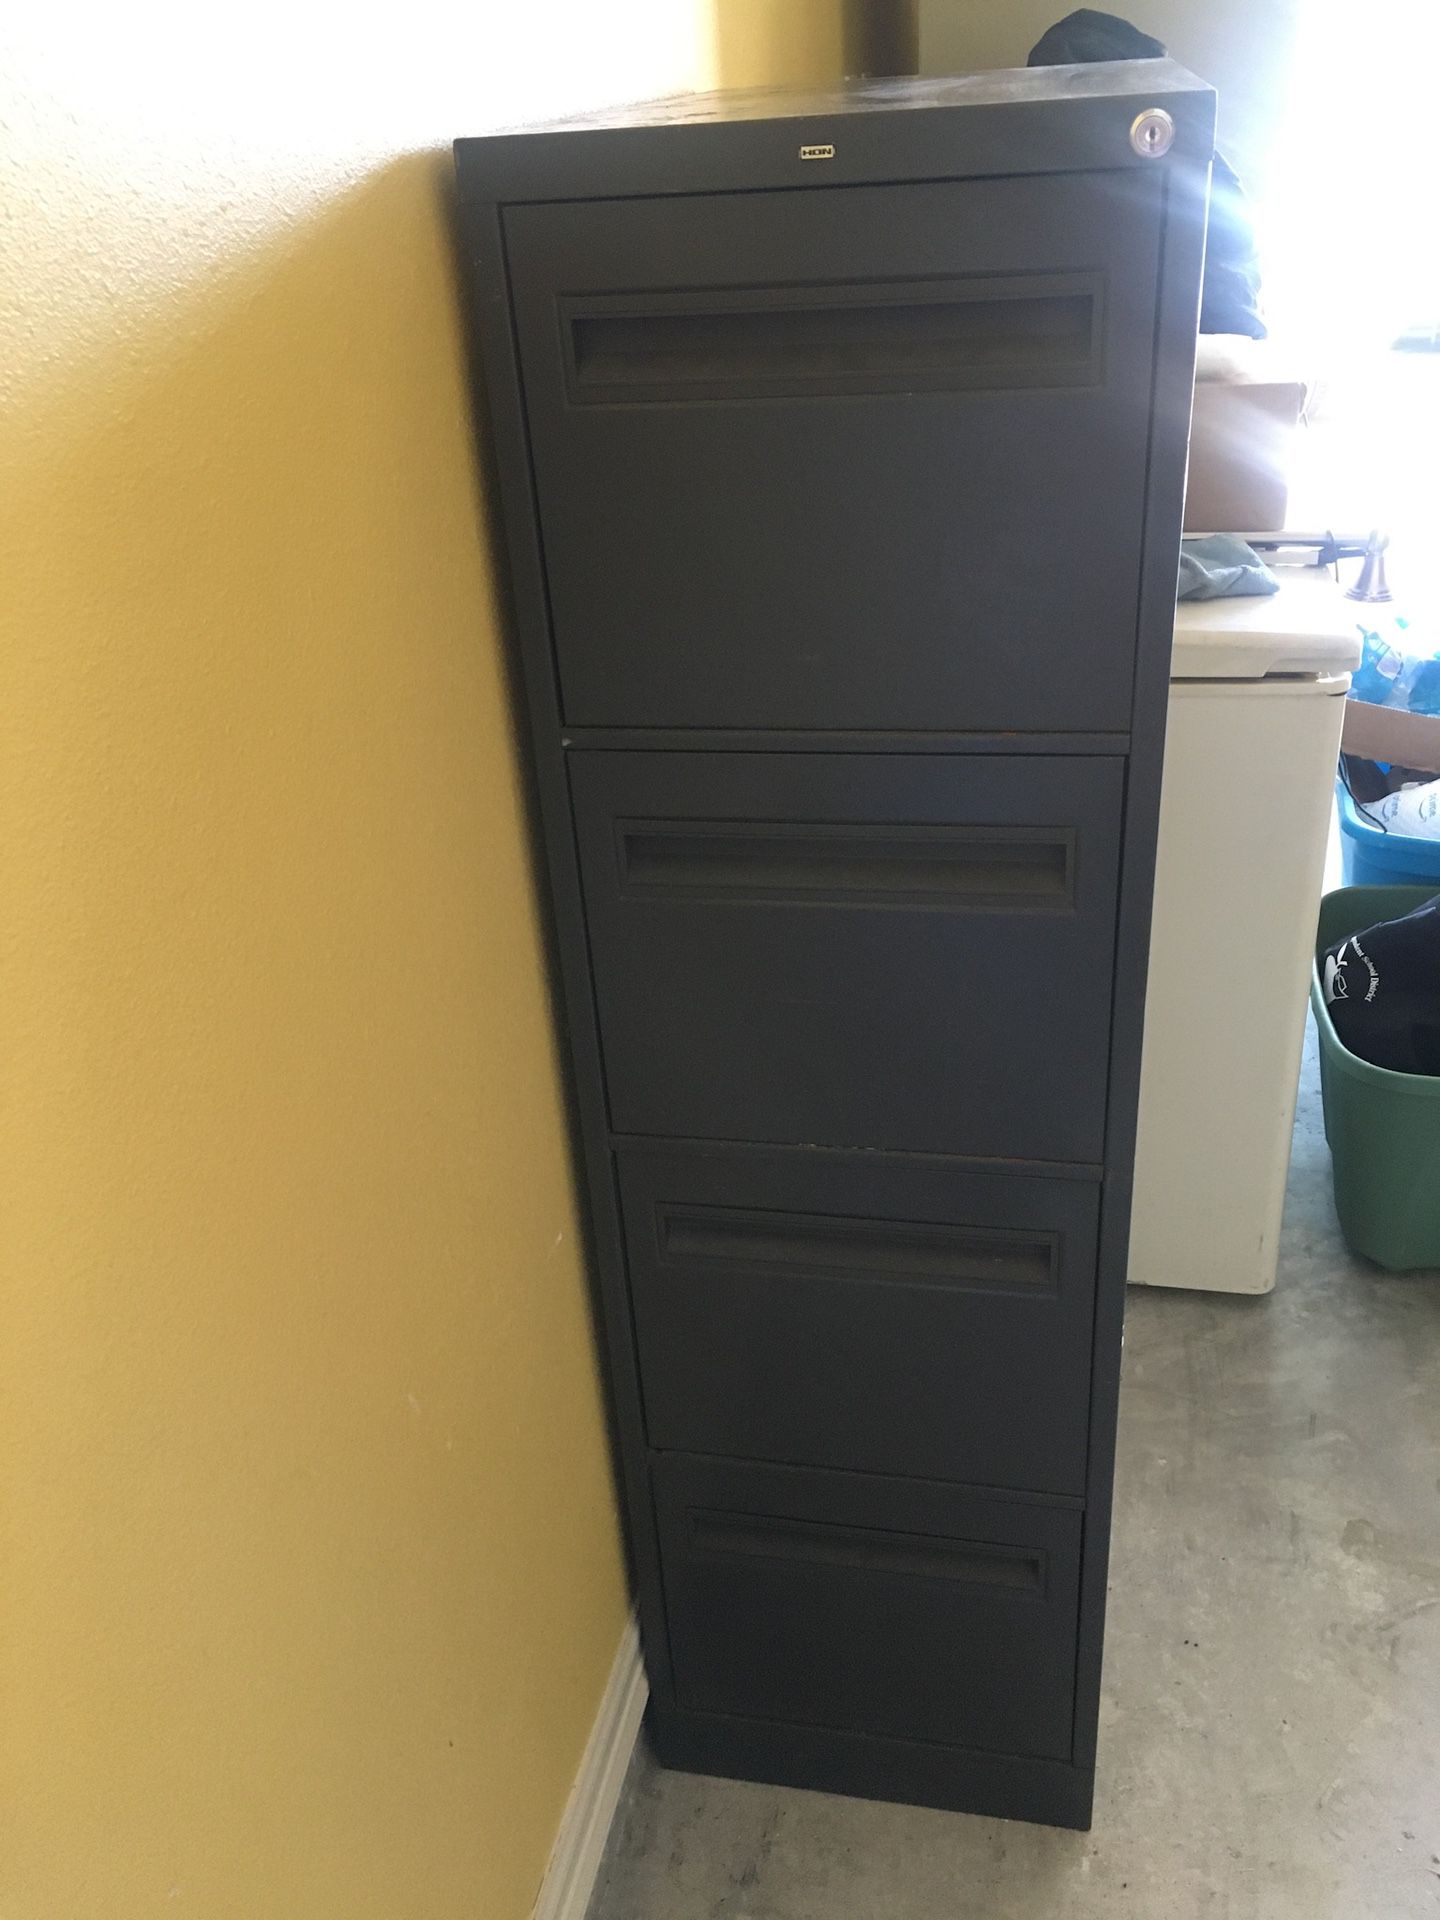 HON 4 drawer File cabinet Good condition. No key. Minor cosmetic wear on top. See pics